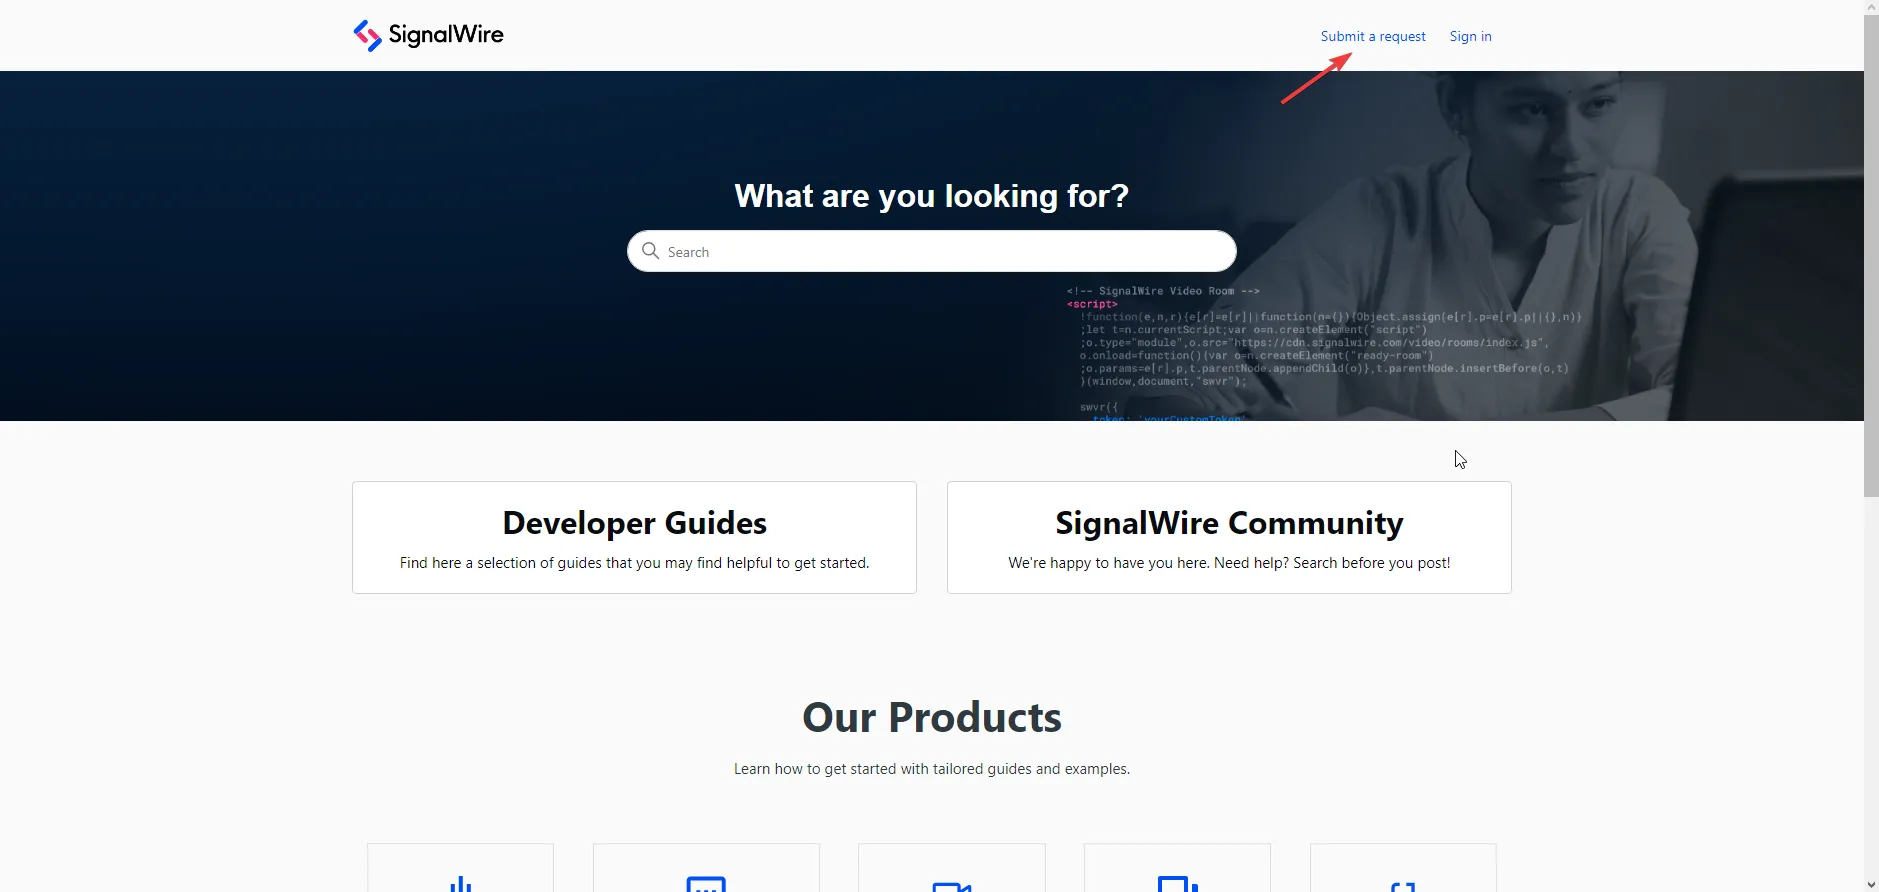 A screenshot of SignalWire's Support Portal, which has a search bar, Developer Guides, and a Community link. An arrow points to a link labeled 'Submit a request' in the top right.